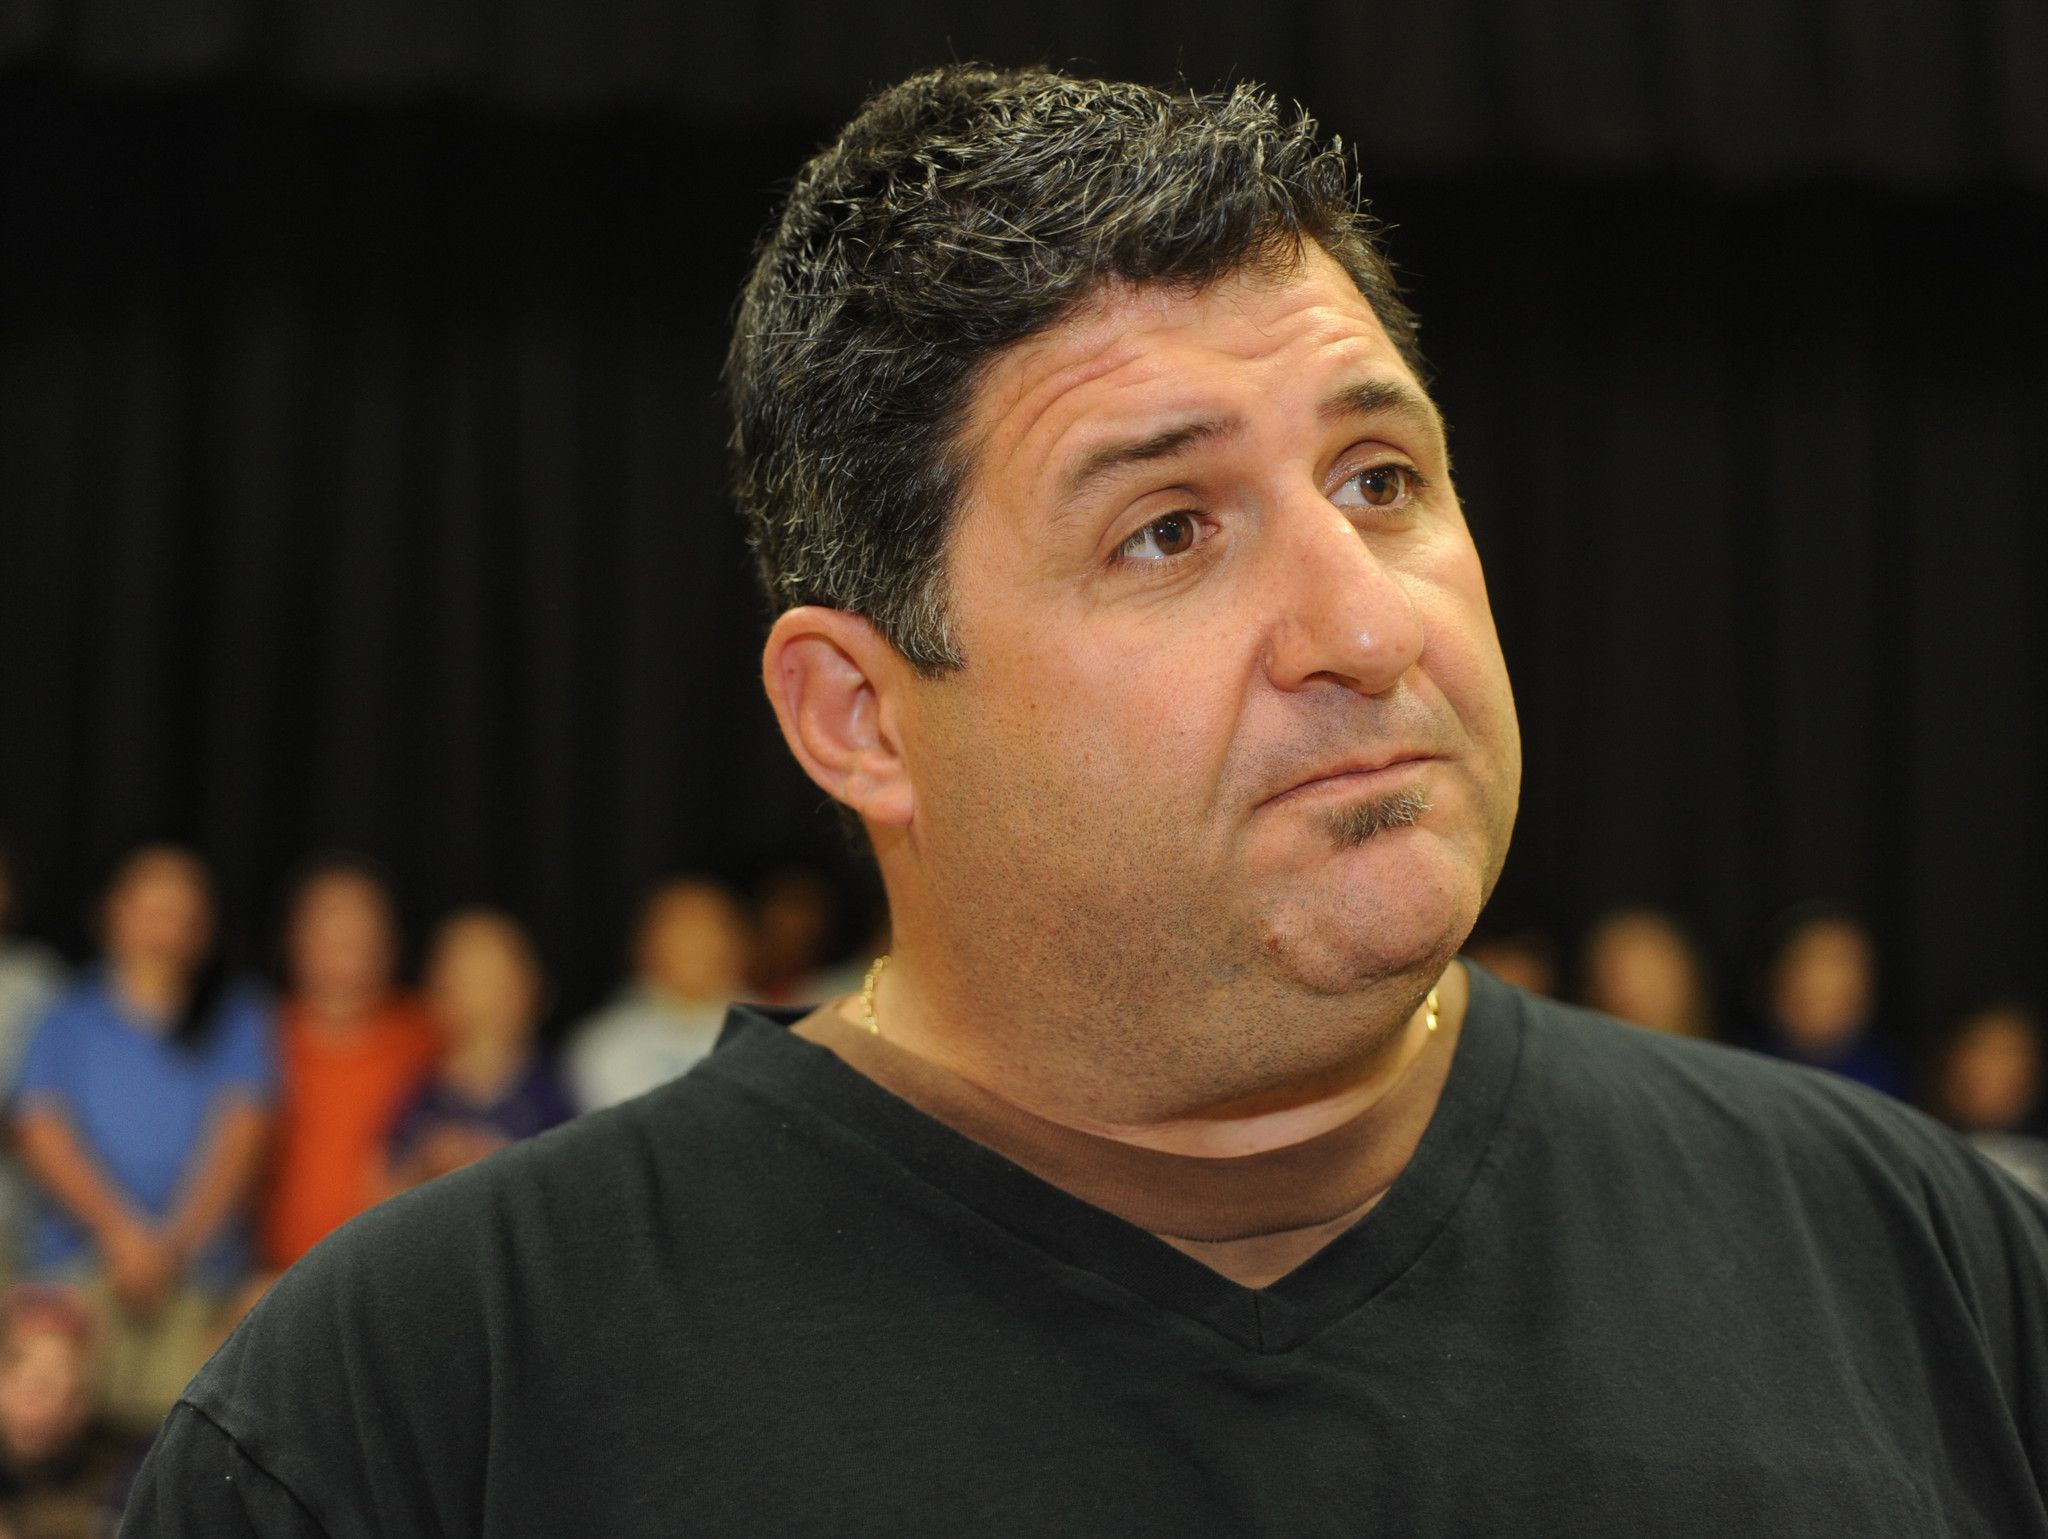 Pictures of Tony Siragusa